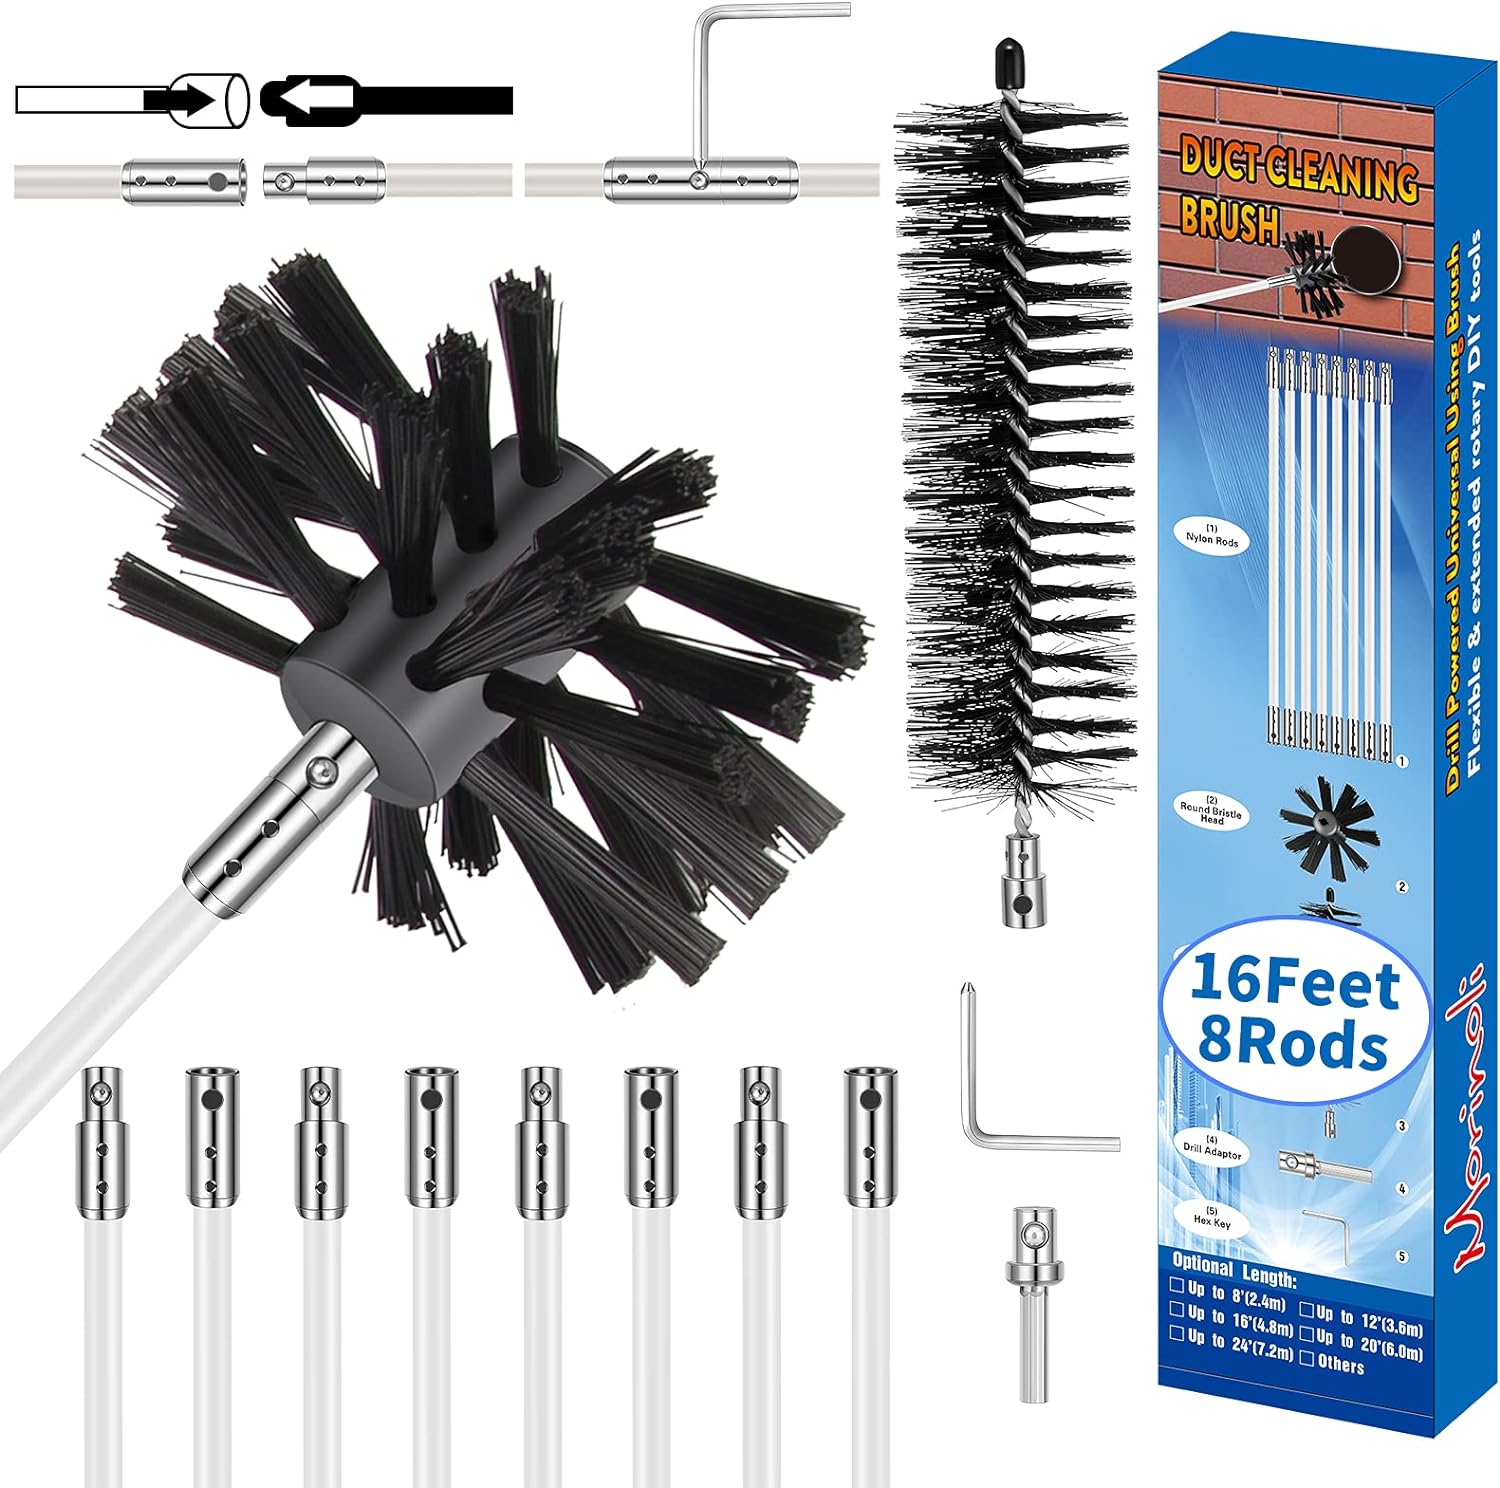 Dryer Vent Cleaning Kit